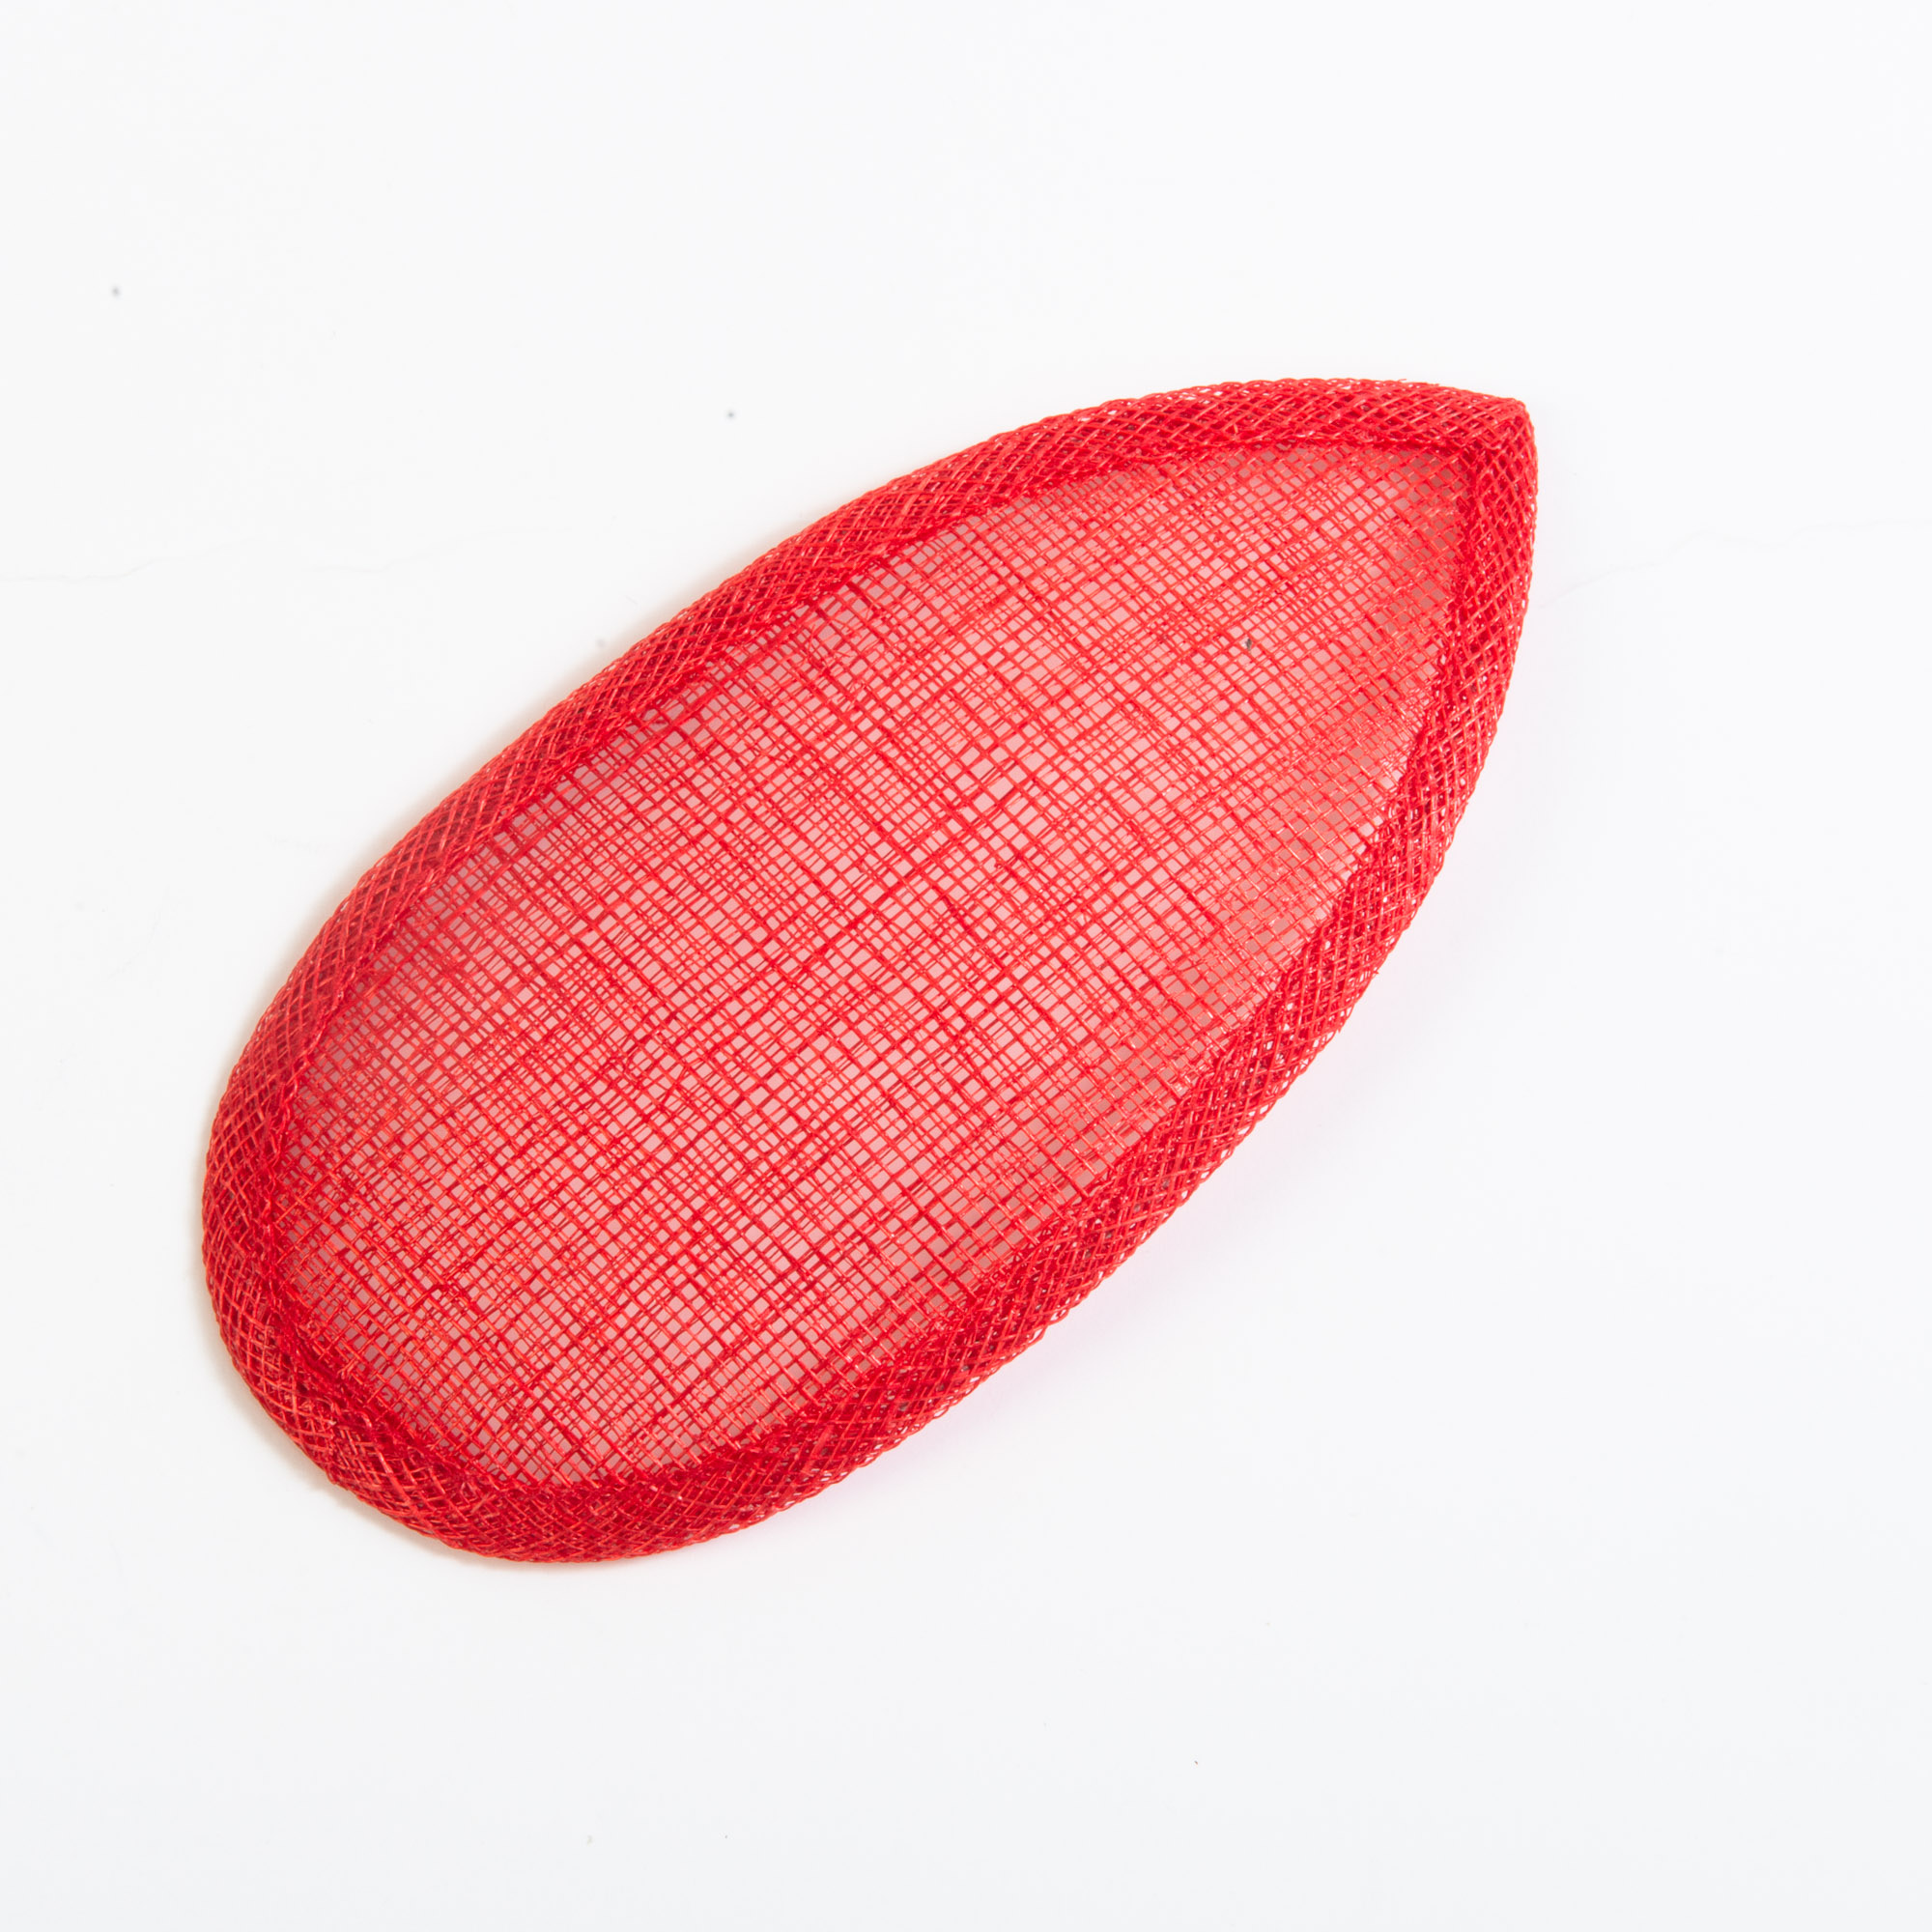 Red Sinamay Teardrop Fascinator Hat Base Available in 16 Colors 